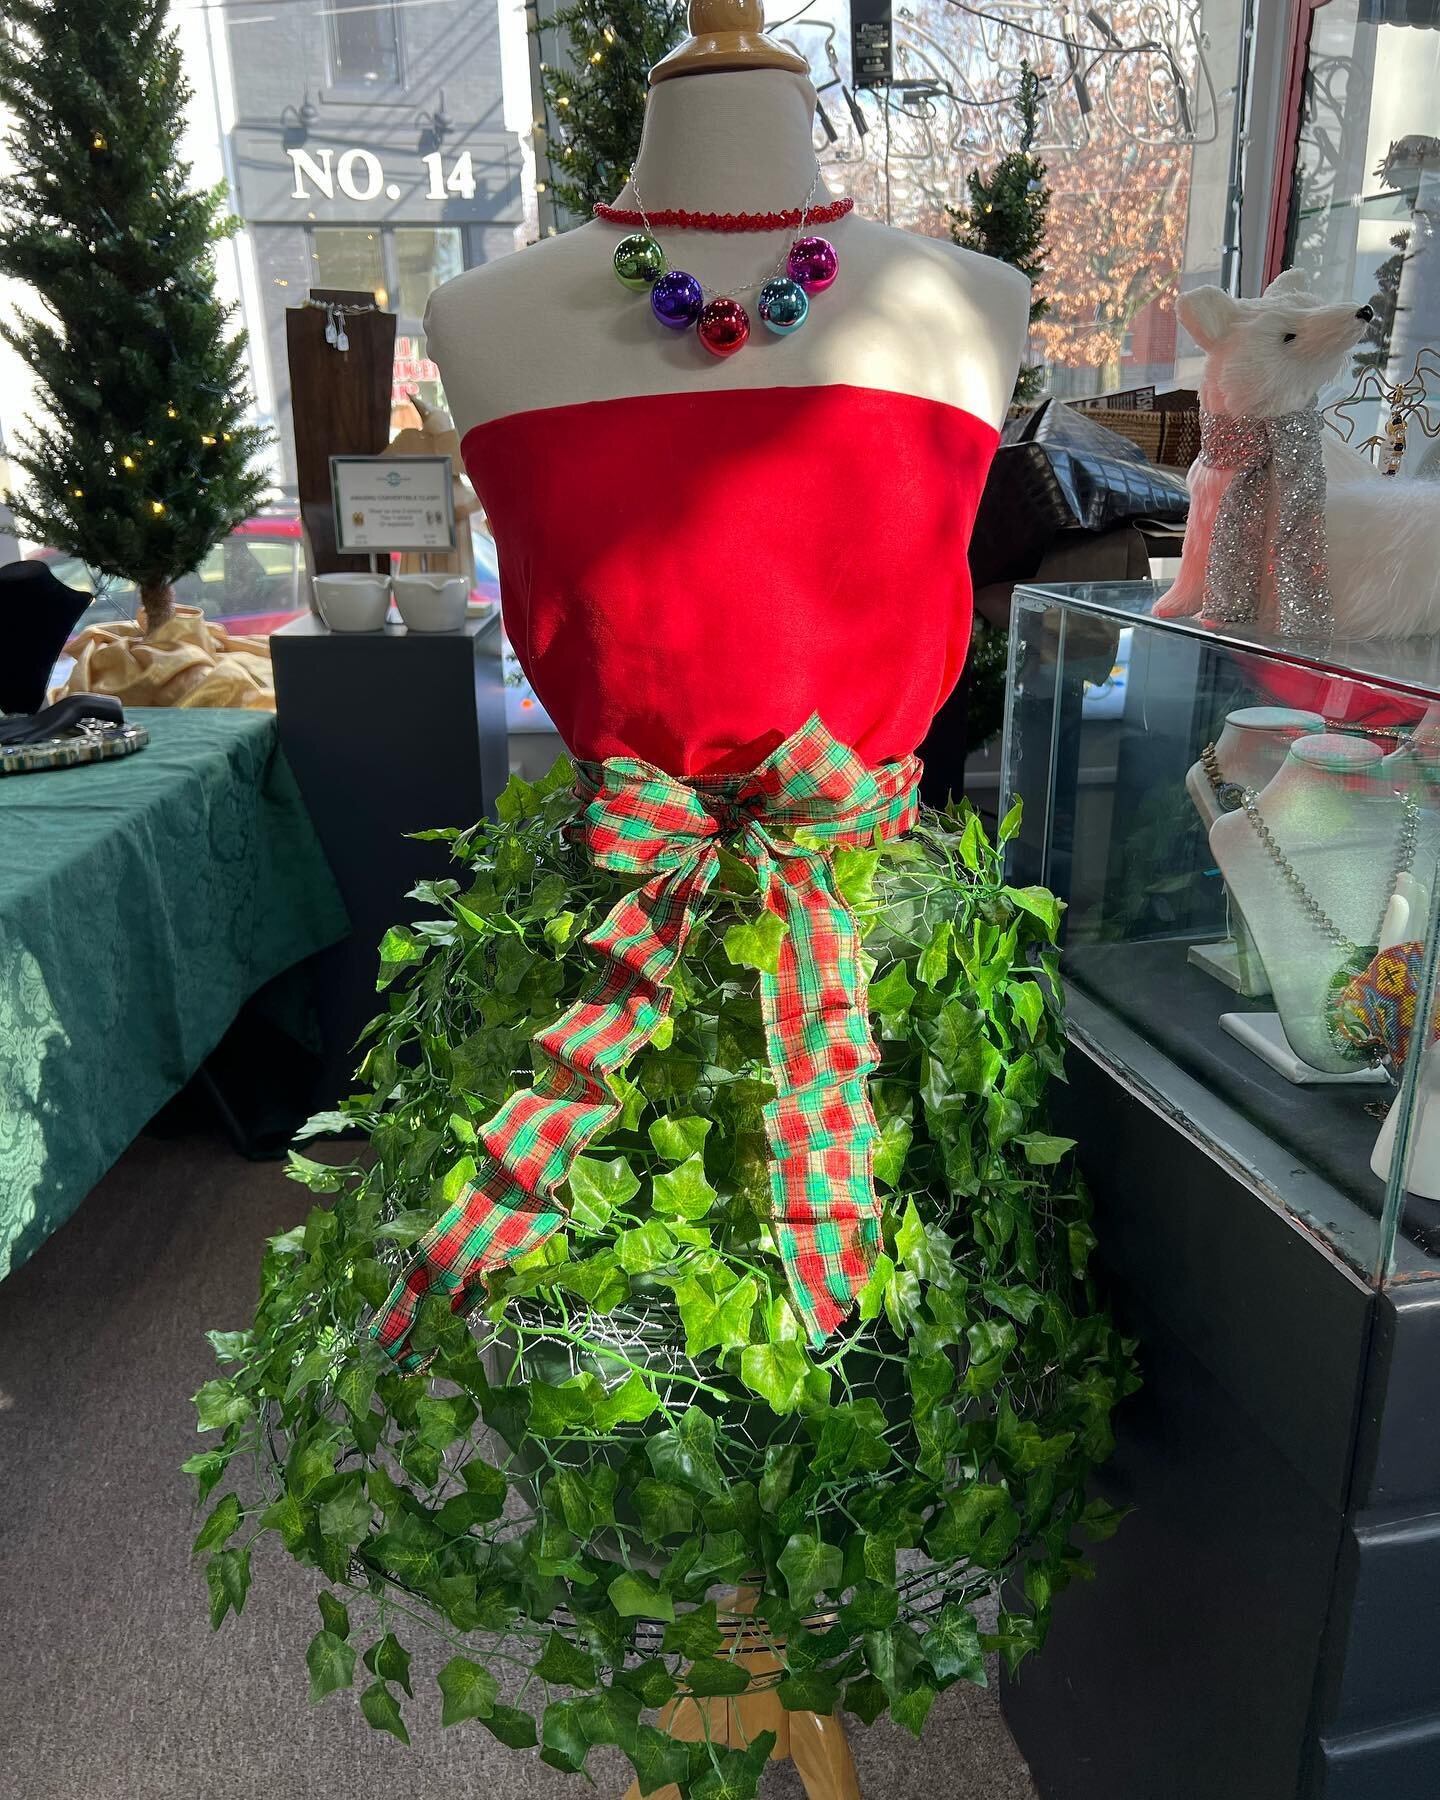 Ready for the holidays at CrystalBeadBazaar! We can help you get ready, too!  #diyjewelrymaking #lawrencevillepgh